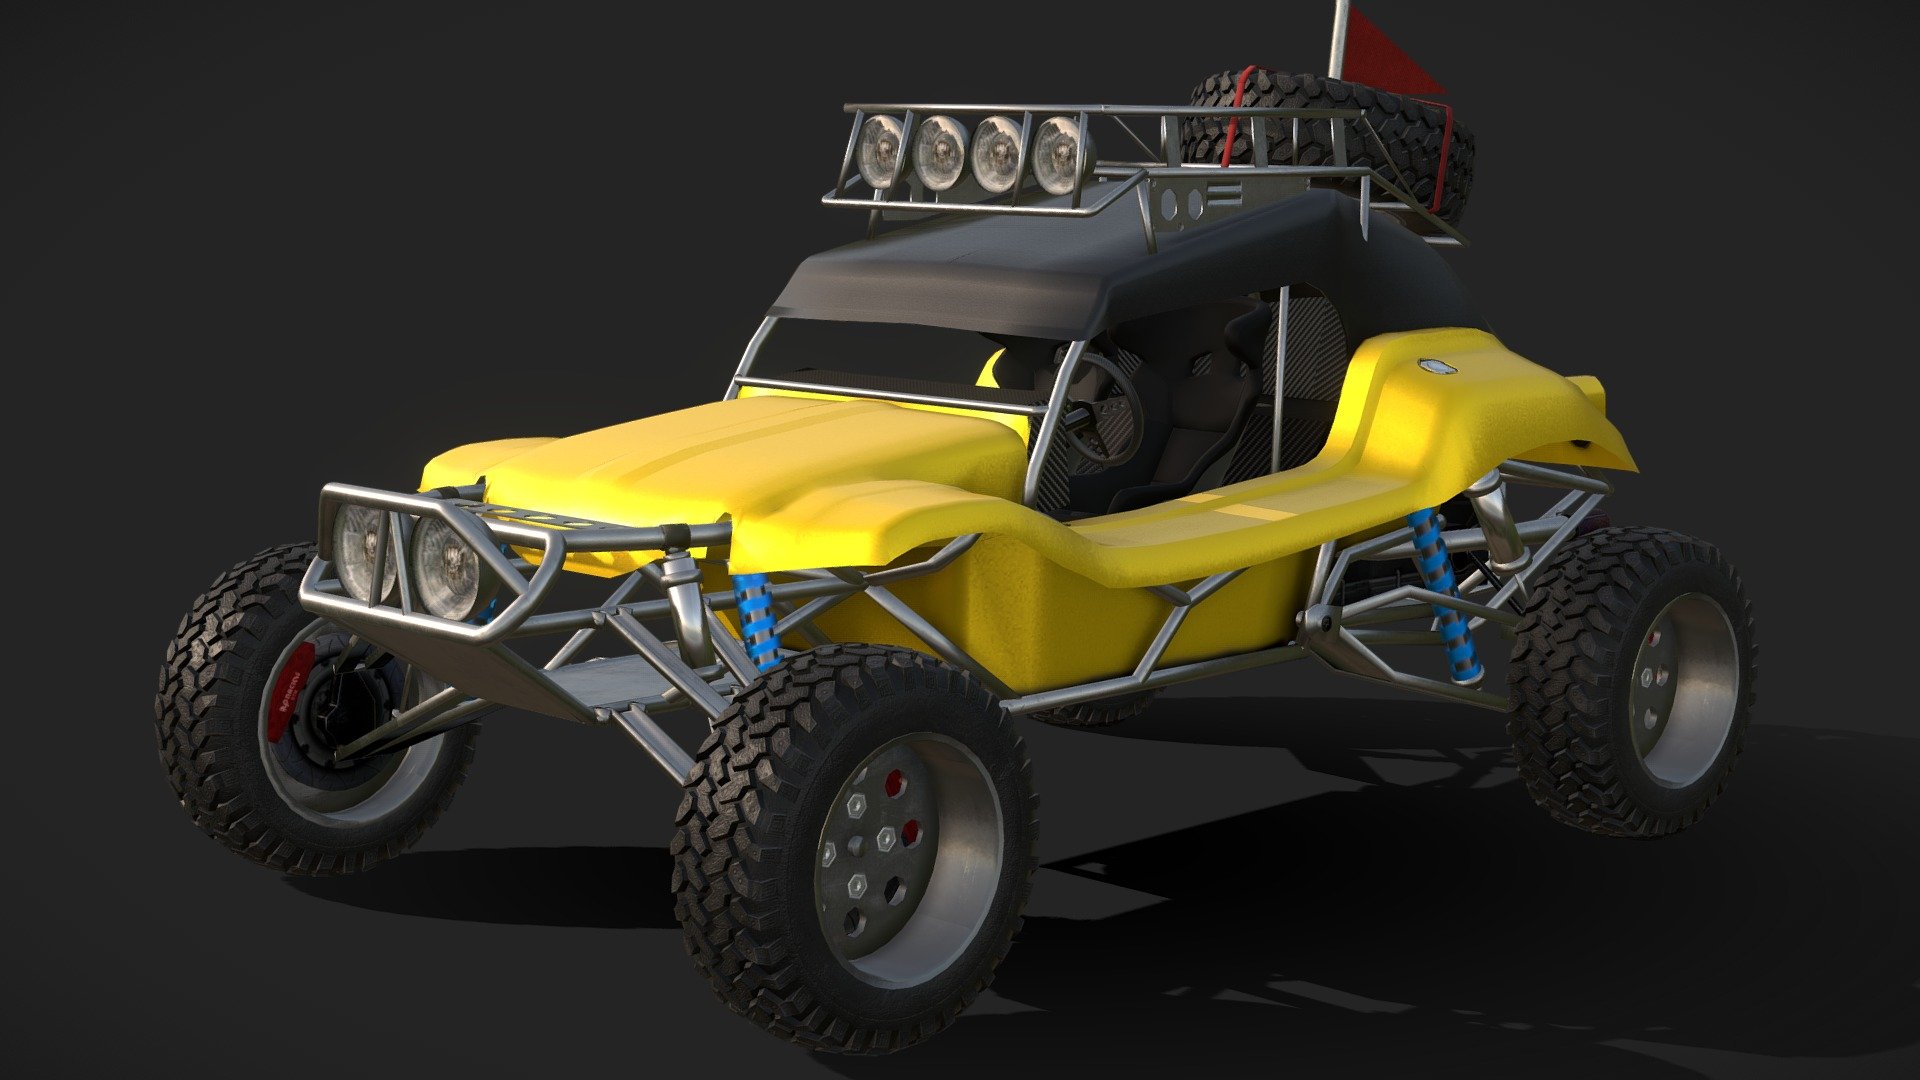 Wombat Typhoon inspired from Motorstorm Monument-Valley.

This model is kept lowpoly and optimized for use in Videogames.

Textures come in PNG format.

Note: This model is not rigged!

Modell made using Blender 2.78 and Adobe Substance for painting the textures 3d model